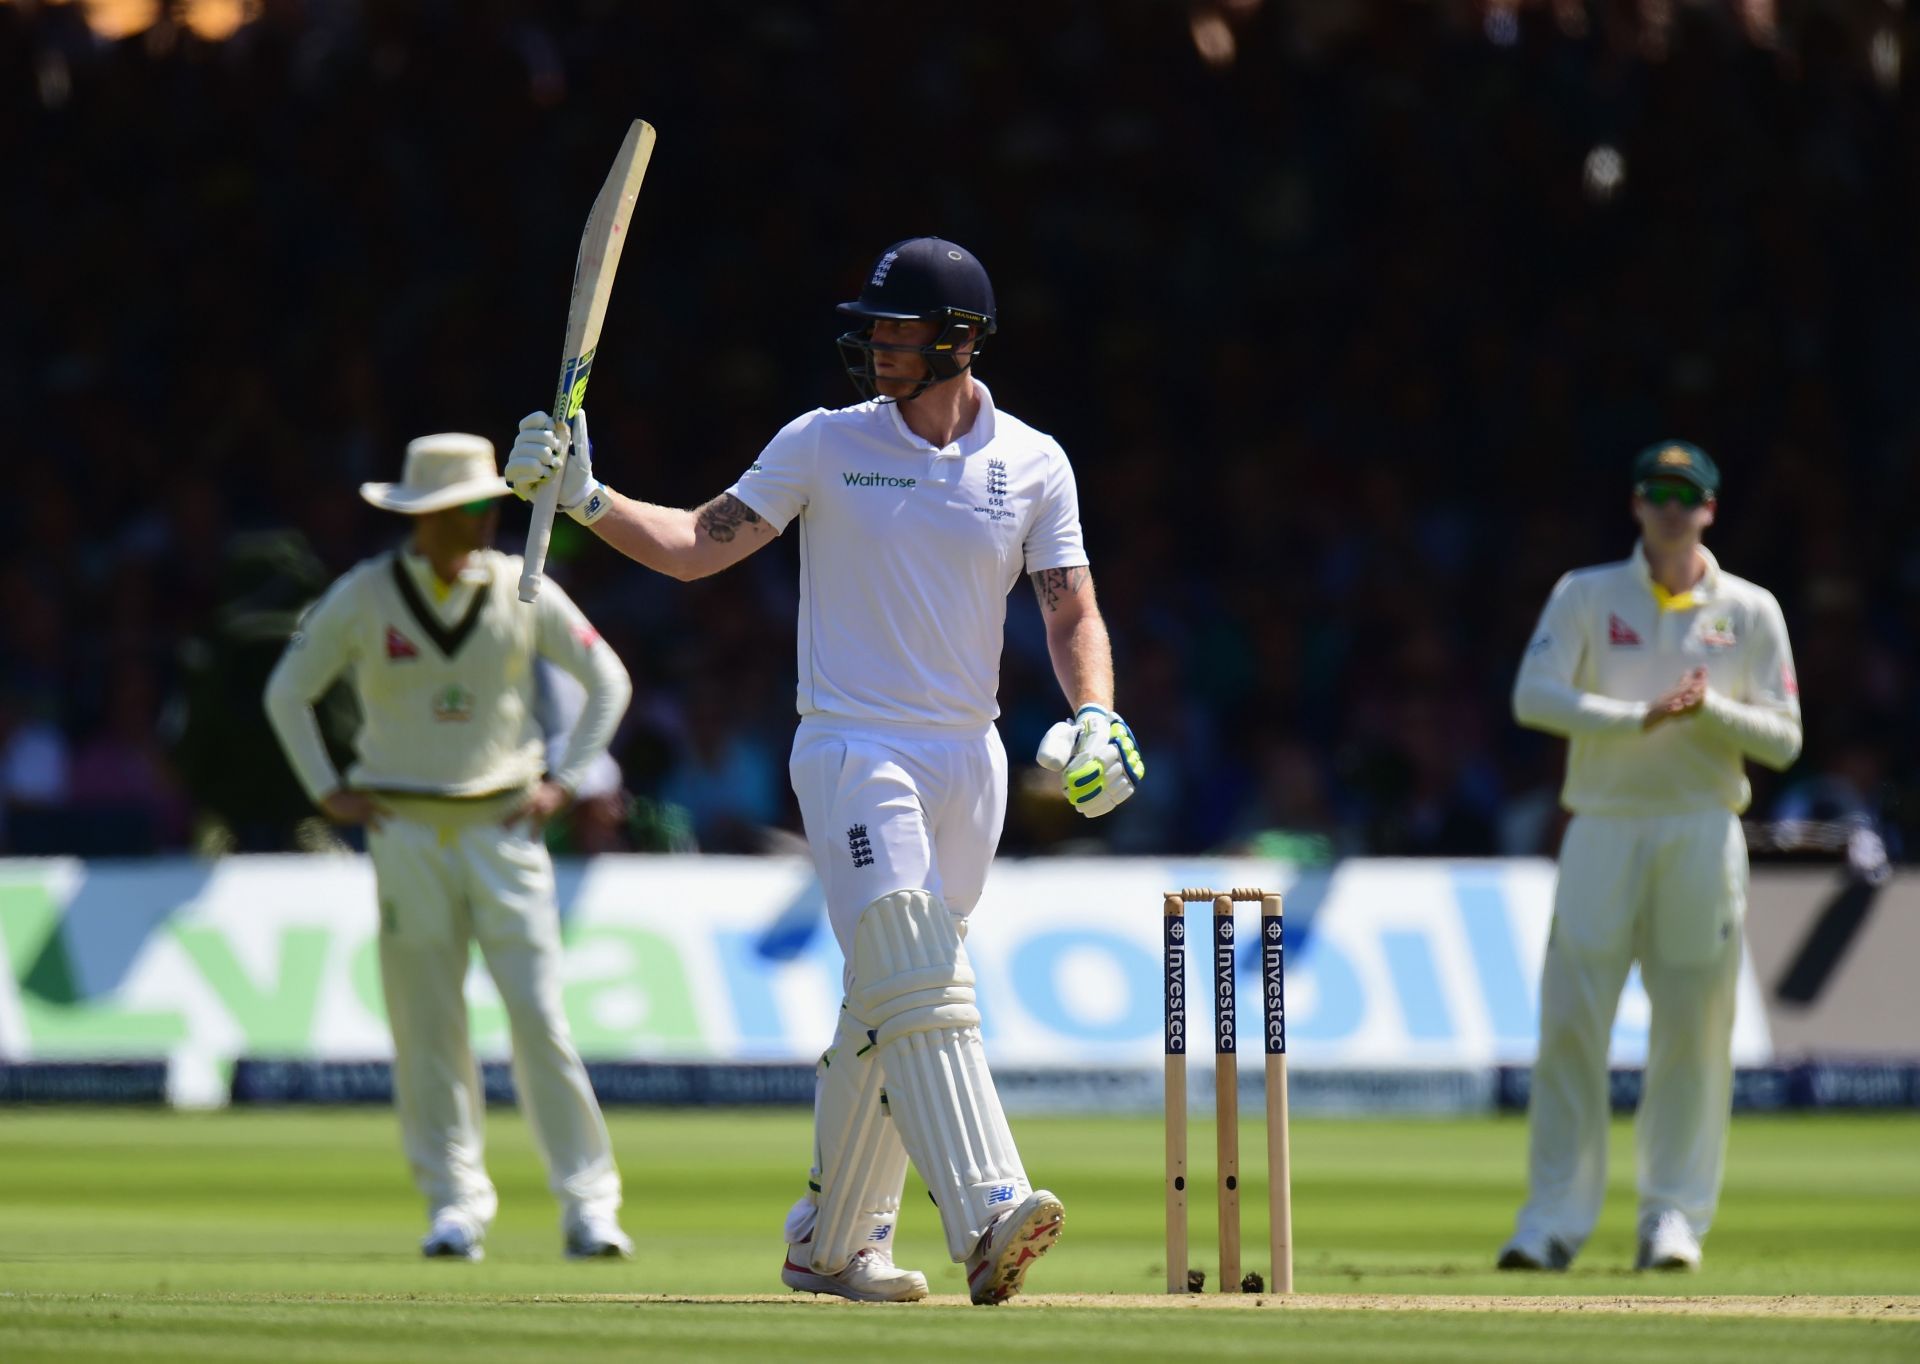 Stokes was the lone ranger for England